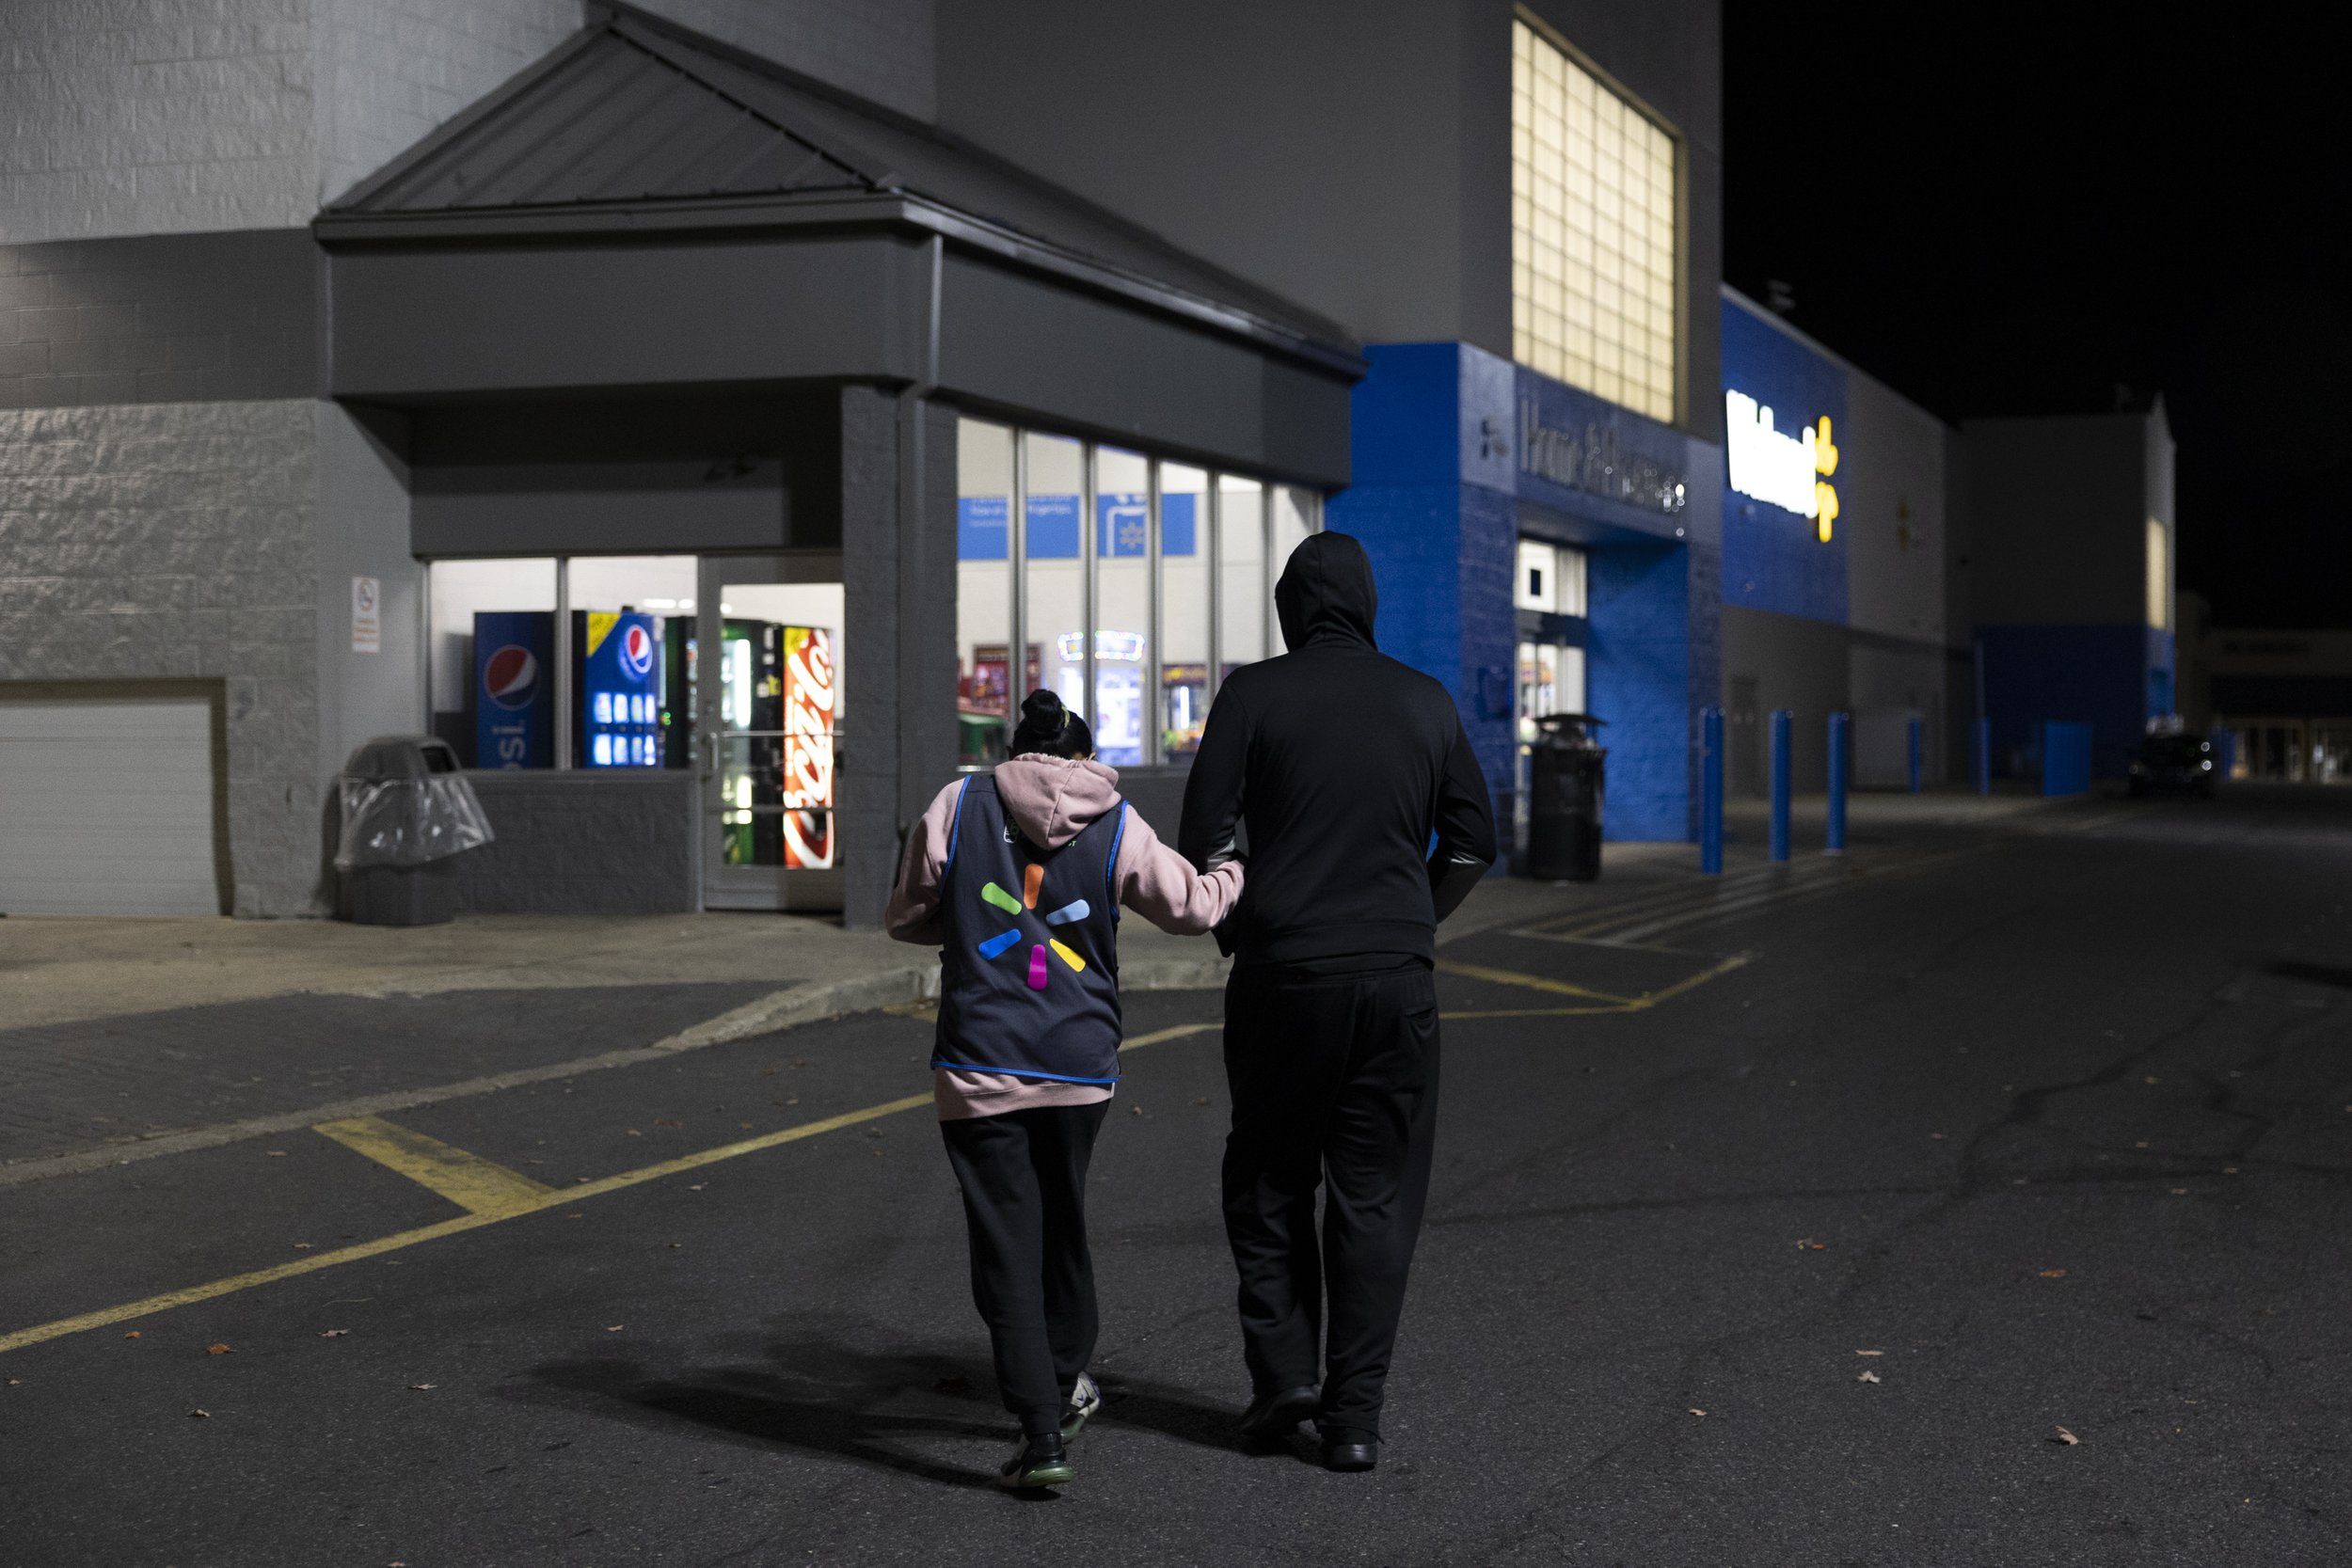  9:58PM: Veronica and Alex head into Walmart for their nightly shift, where they will work until 7:00AM the following morning. 